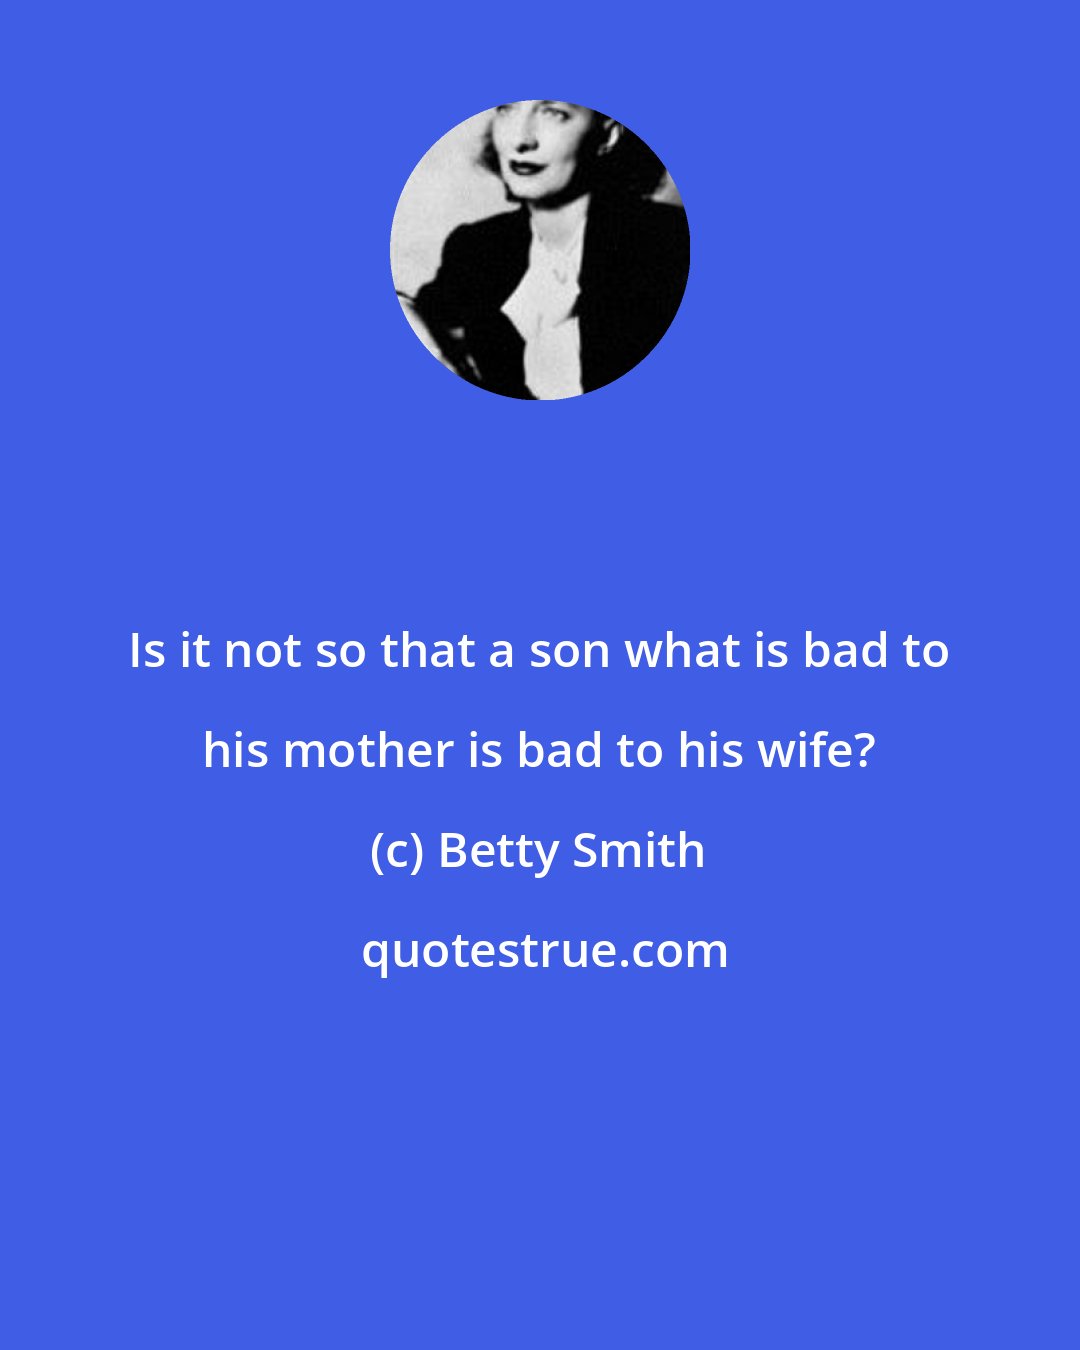 Betty Smith: Is it not so that a son what is bad to his mother is bad to his wife?